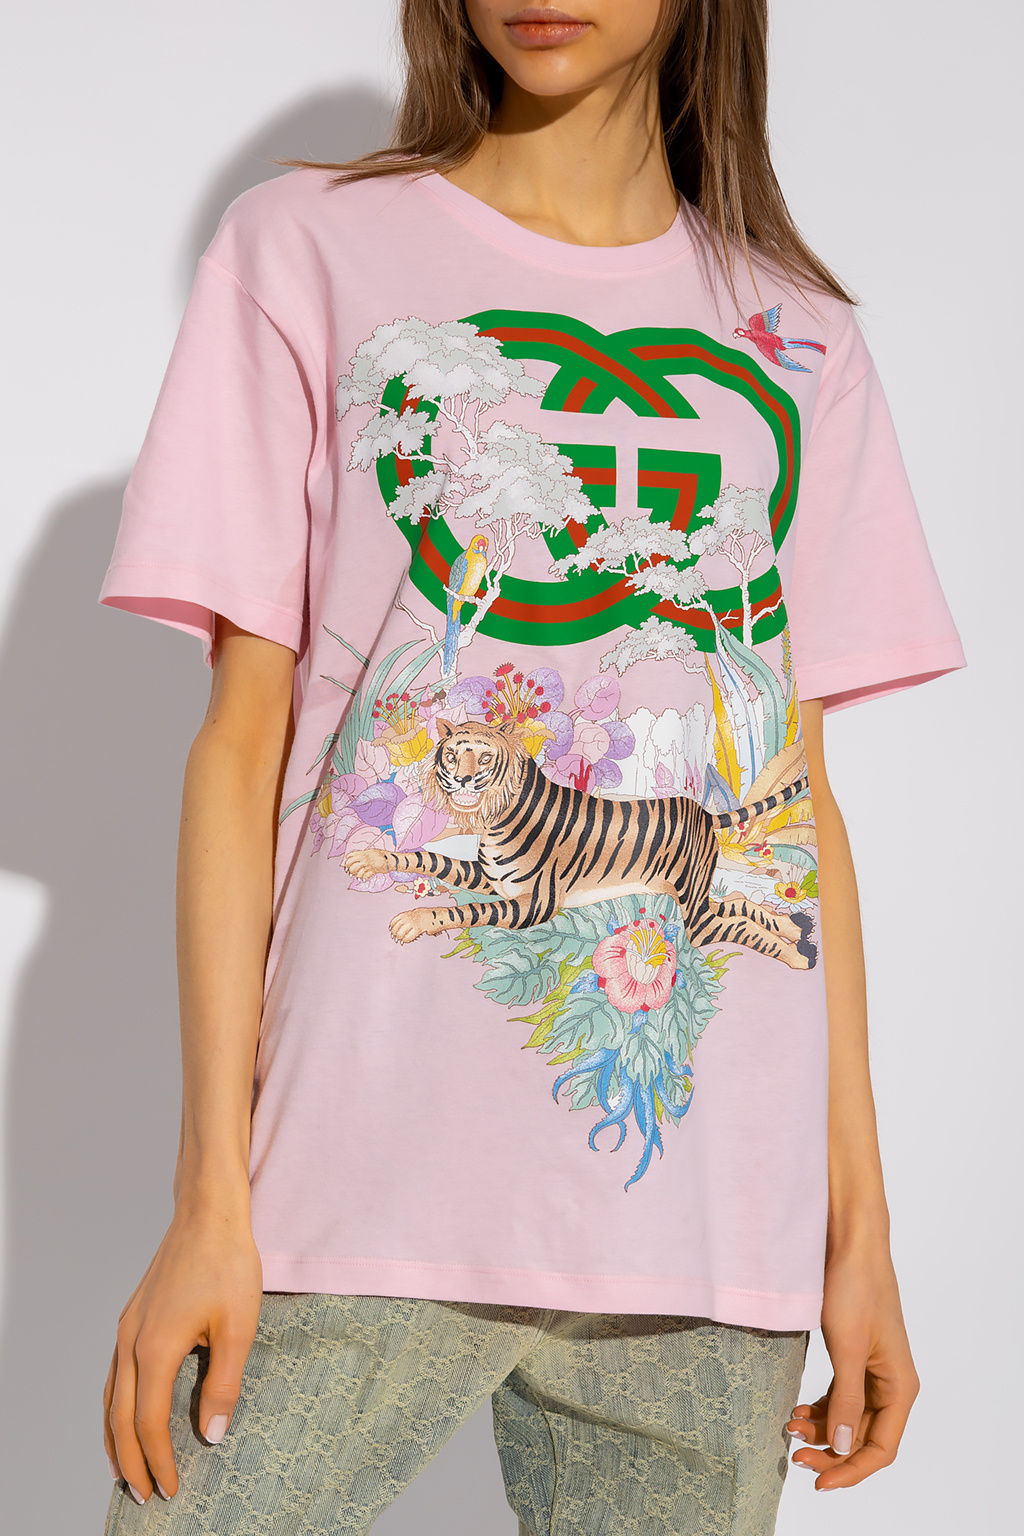 Pink Printed T-shirt from the 'Gucci Tiger' collection Gucci - Vitkac France